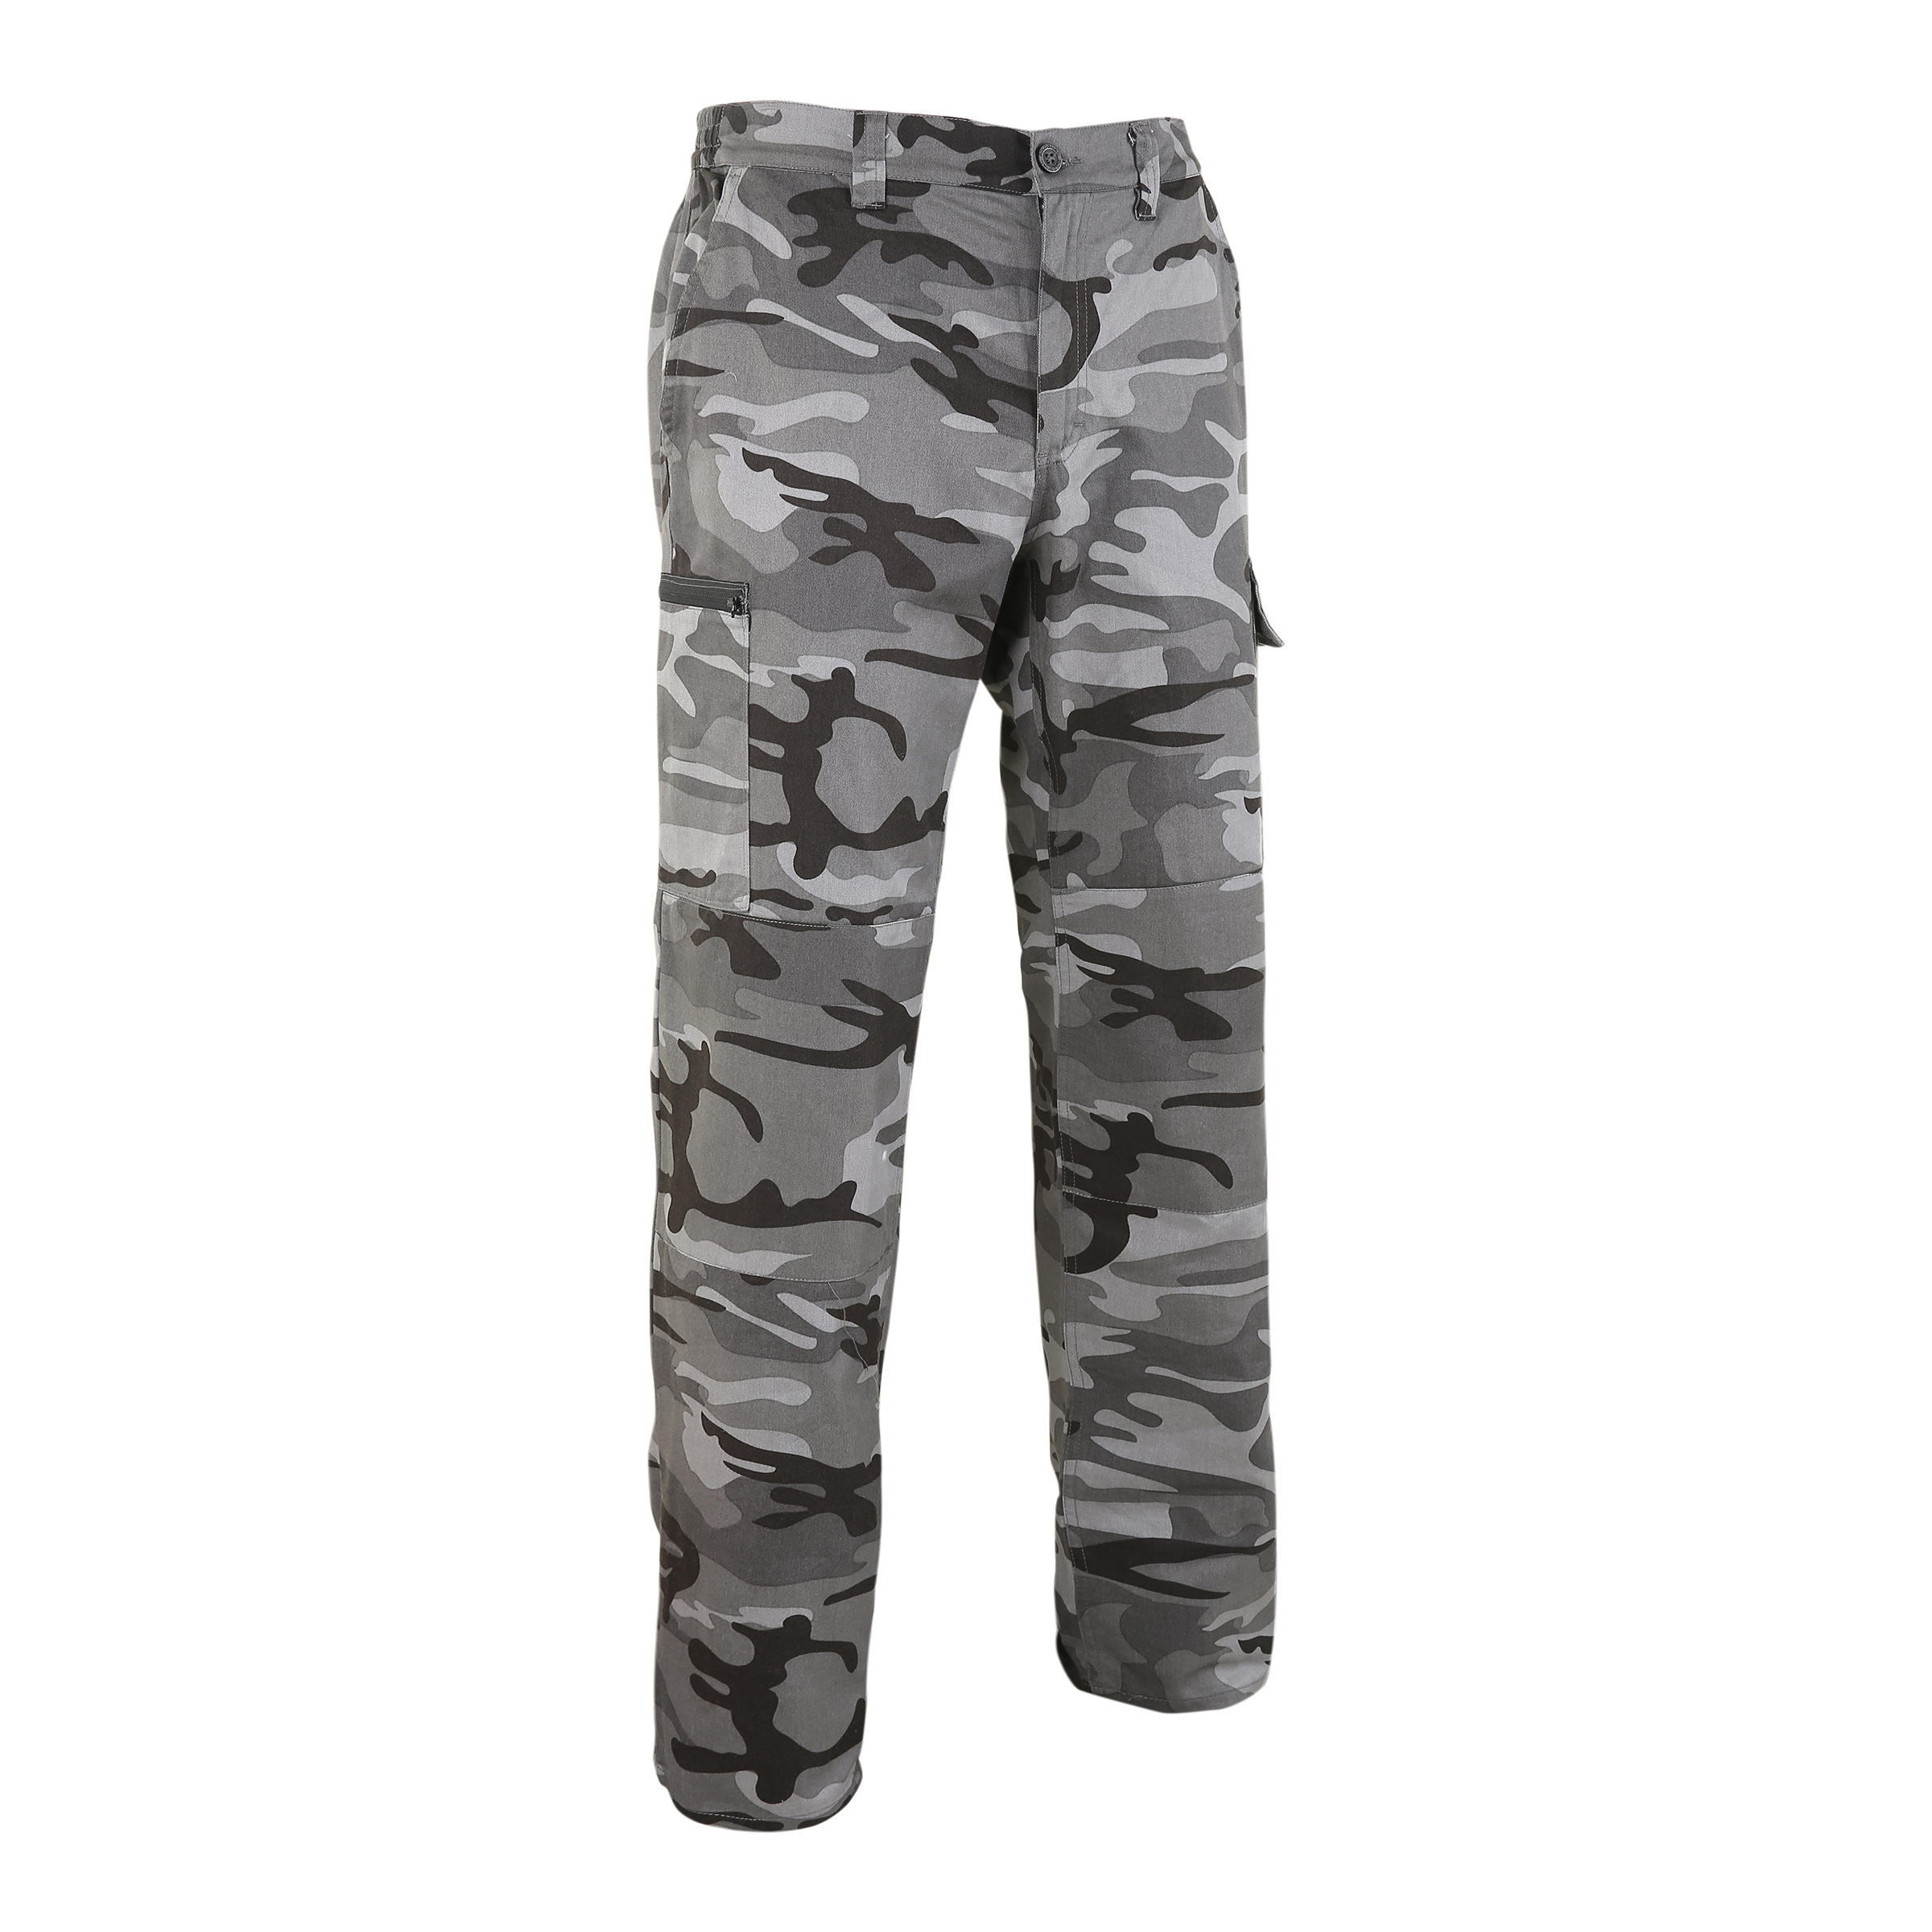 Buy Camouflaged Pants for Outdoor 